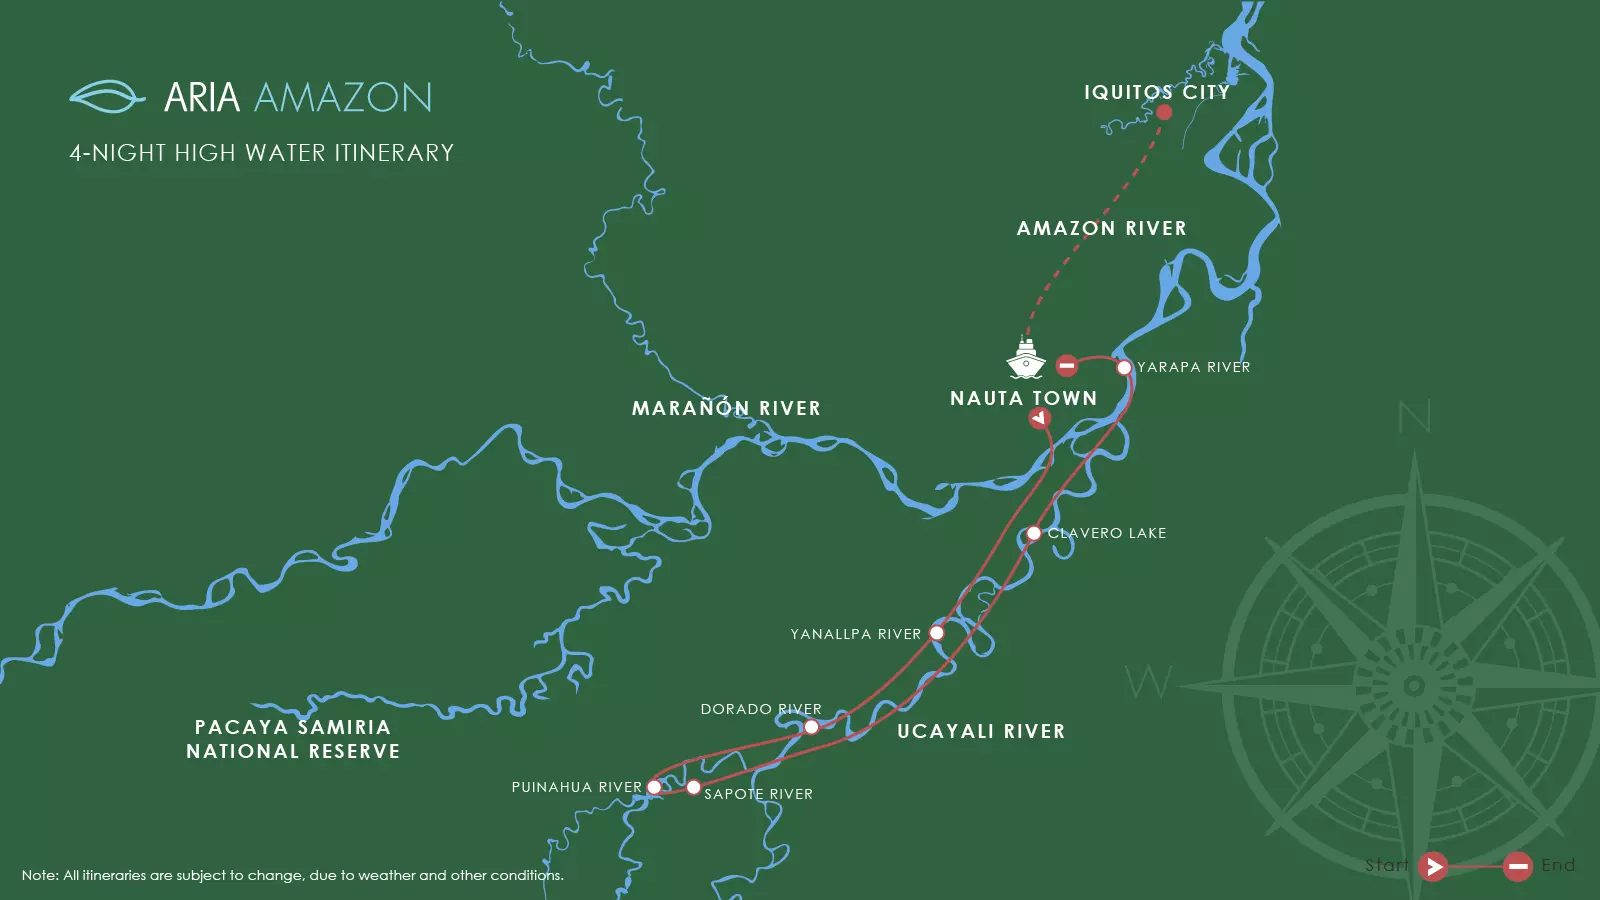 Route map of Aria Amazon River Cruise 5-day high-water itinerary, round-trip from Iquitos, Peru, sailing round-trip from Nauta with visits along the Ucayali river.